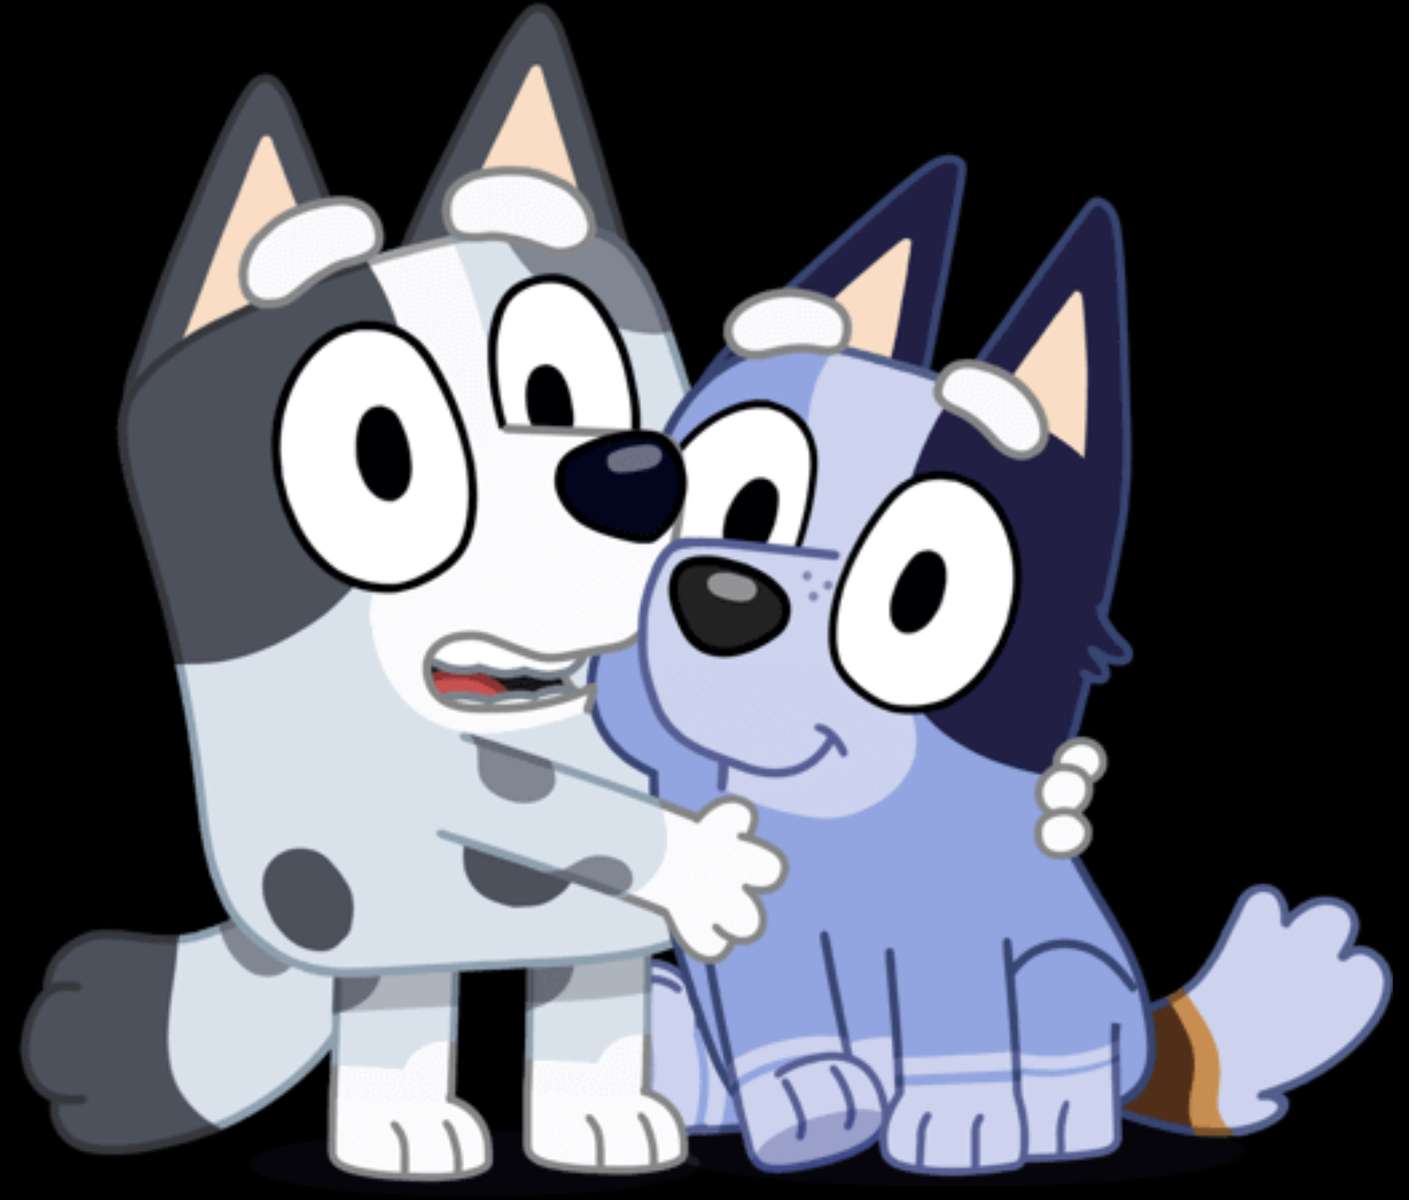 Muffin and Socks Heeler online puzzle